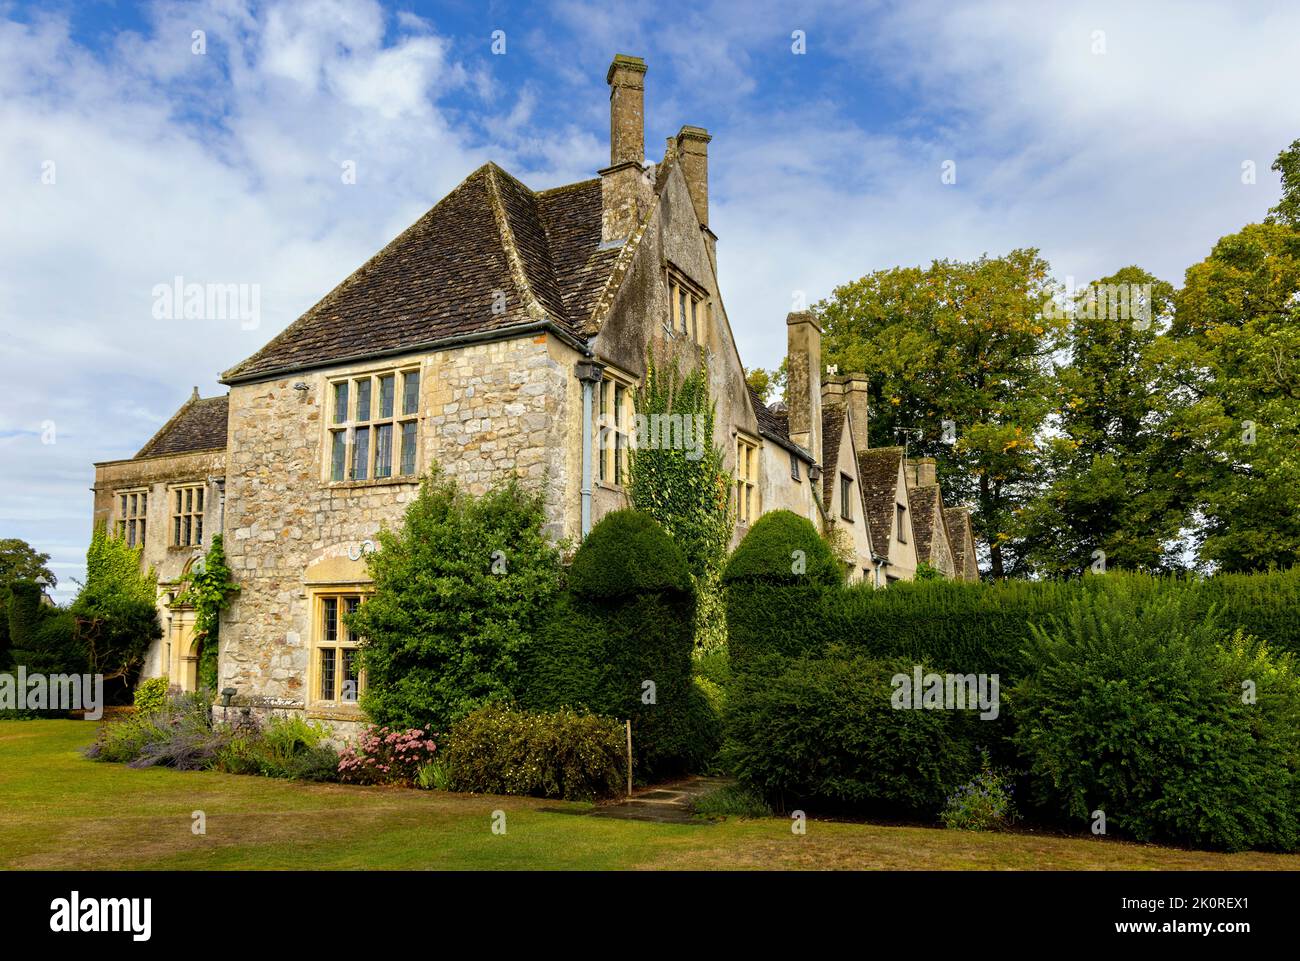 Avebury Manor, a Grade I listed early-16th-century manor house and its surrounding garden in Avebury, Wiltshire, England, United Kingdom. Stock Photo